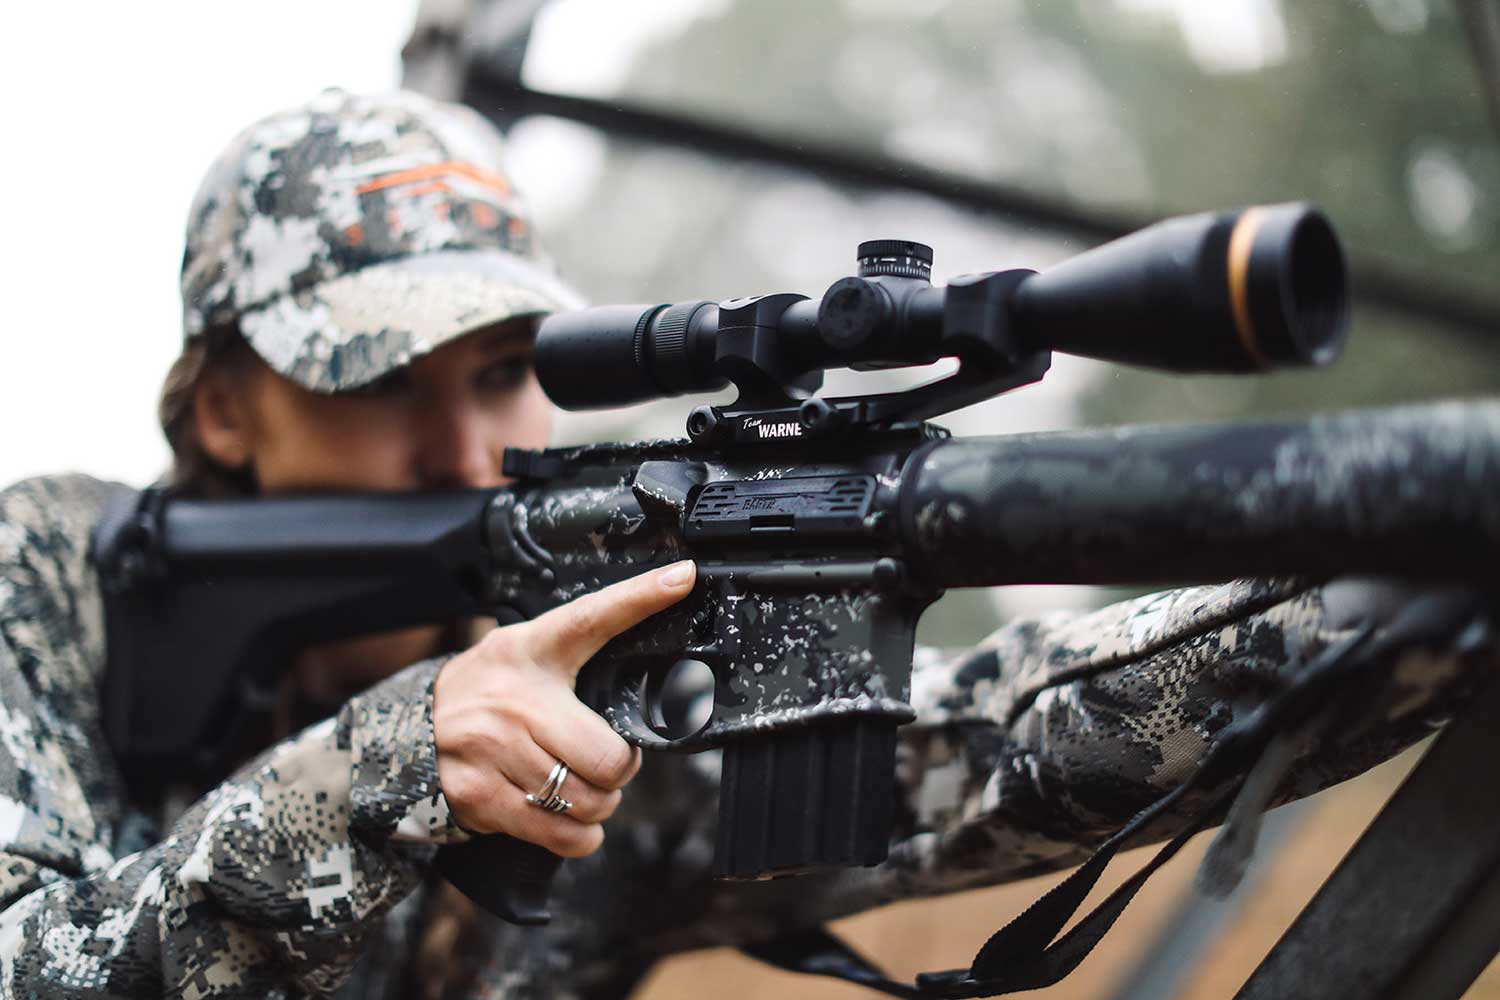 Become a hunting influencer